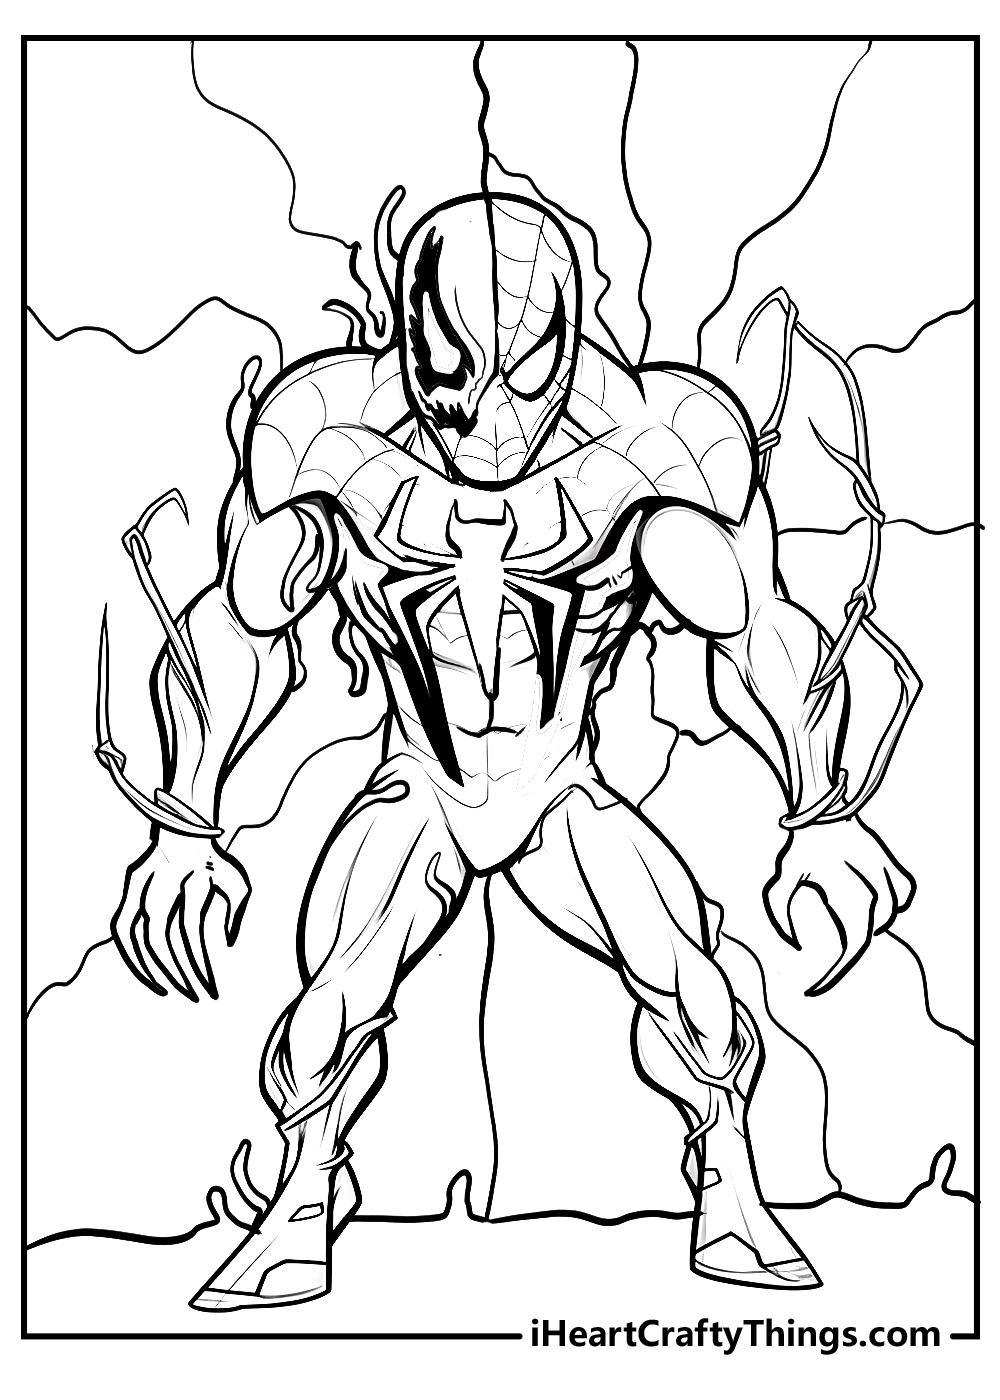 Printable venom coloring pages updated